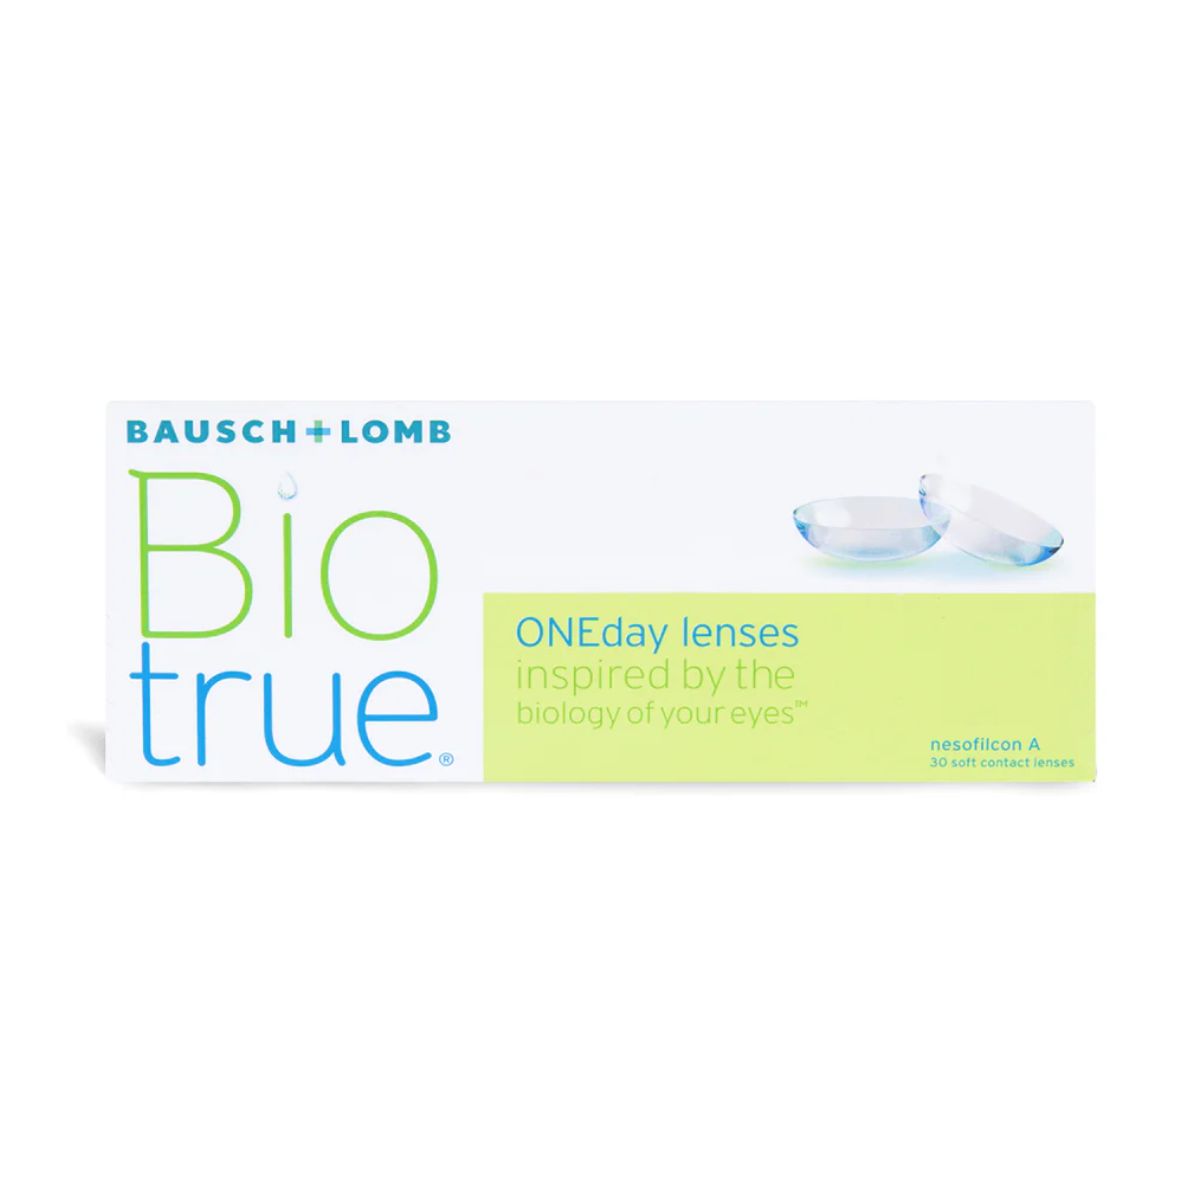 "Bausch & Lomb BioTrue One Day Daily Disposable Contact Lenses optorium"